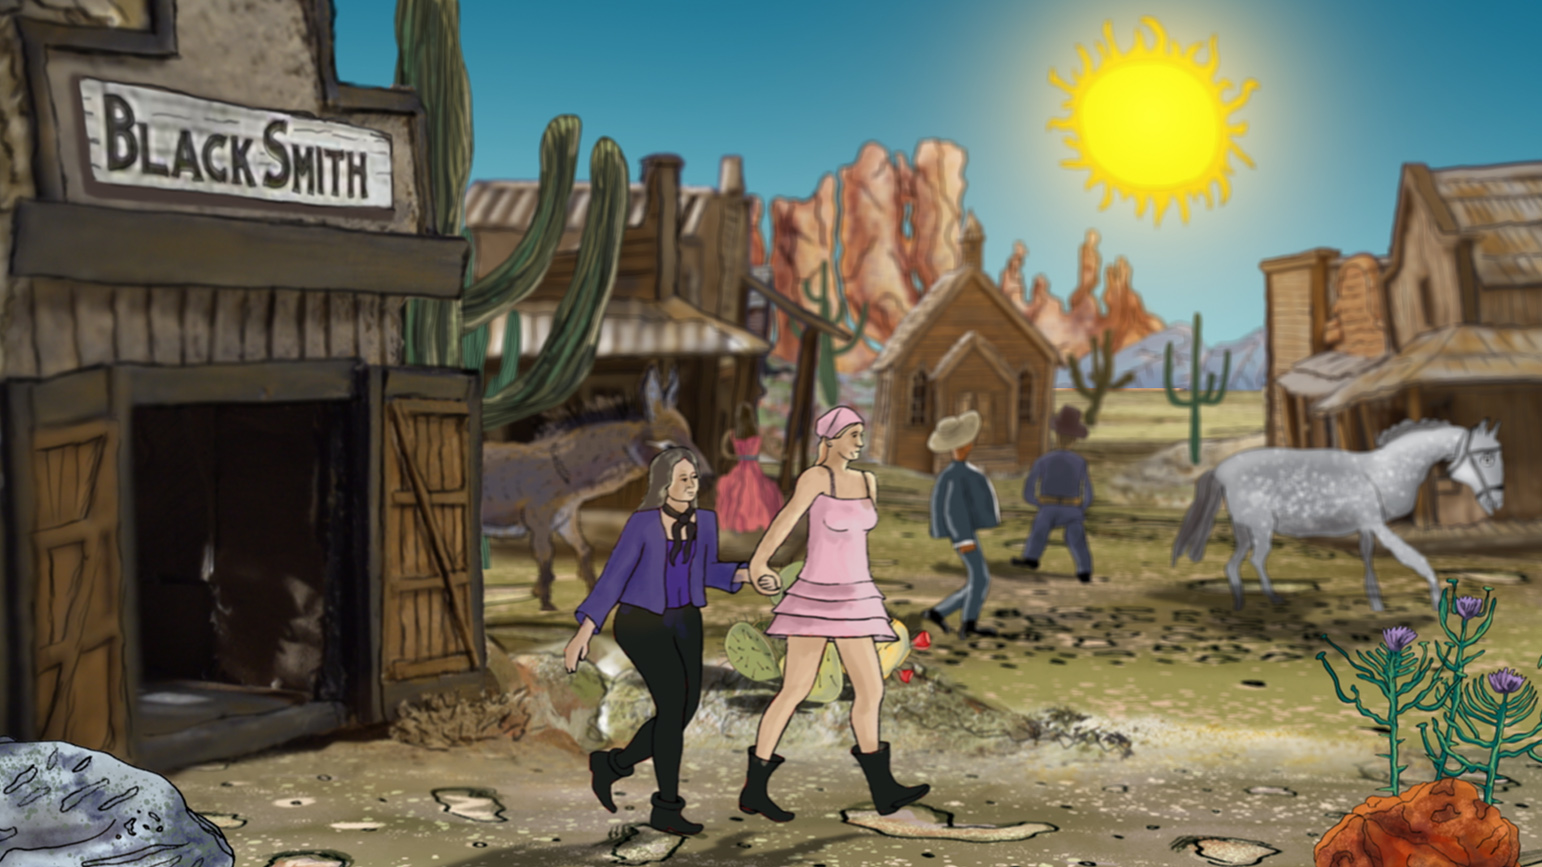 Video still of a cartoon set in old western time with two women holding hands in the foreground